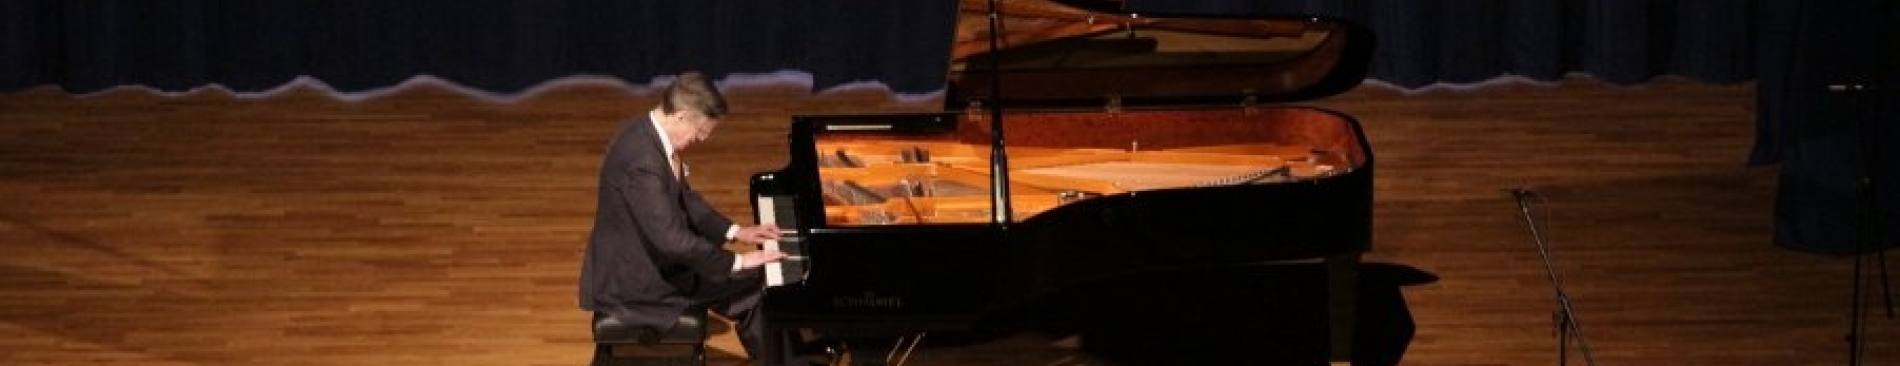 Pianist Peter Serkin Plays Inaugural Concert for St. Cecilia